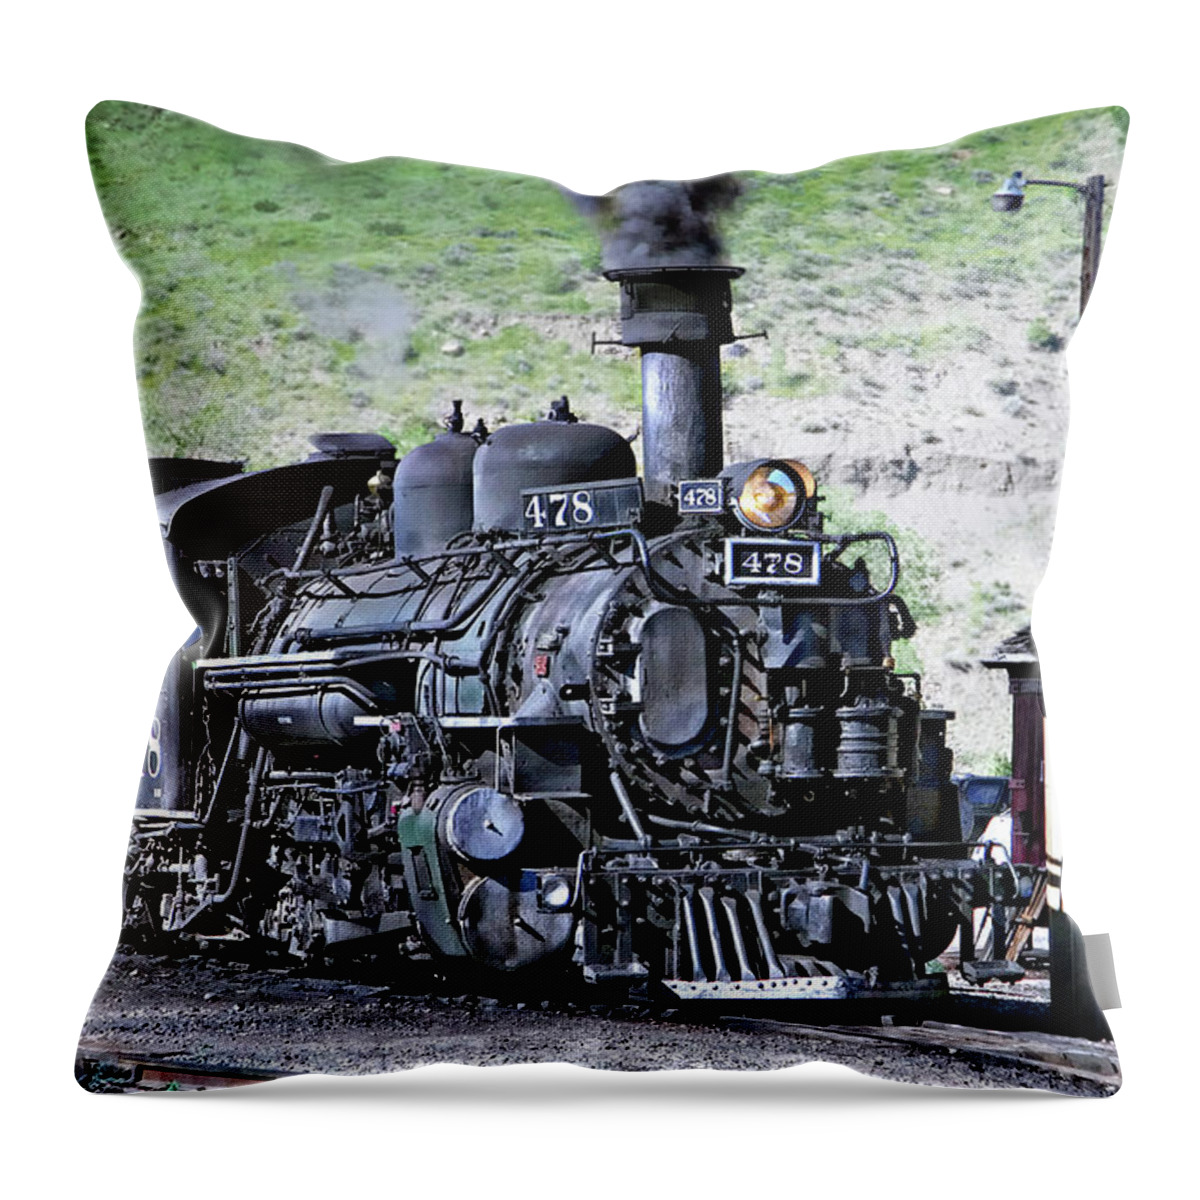 1923 Vintage Railroad Steamtrain Locomotive Vintage Locomotive Train Photography Throw Pillow featuring the photograph 1923 Vintage Railroad Train Locomotive by Jerry Cowart